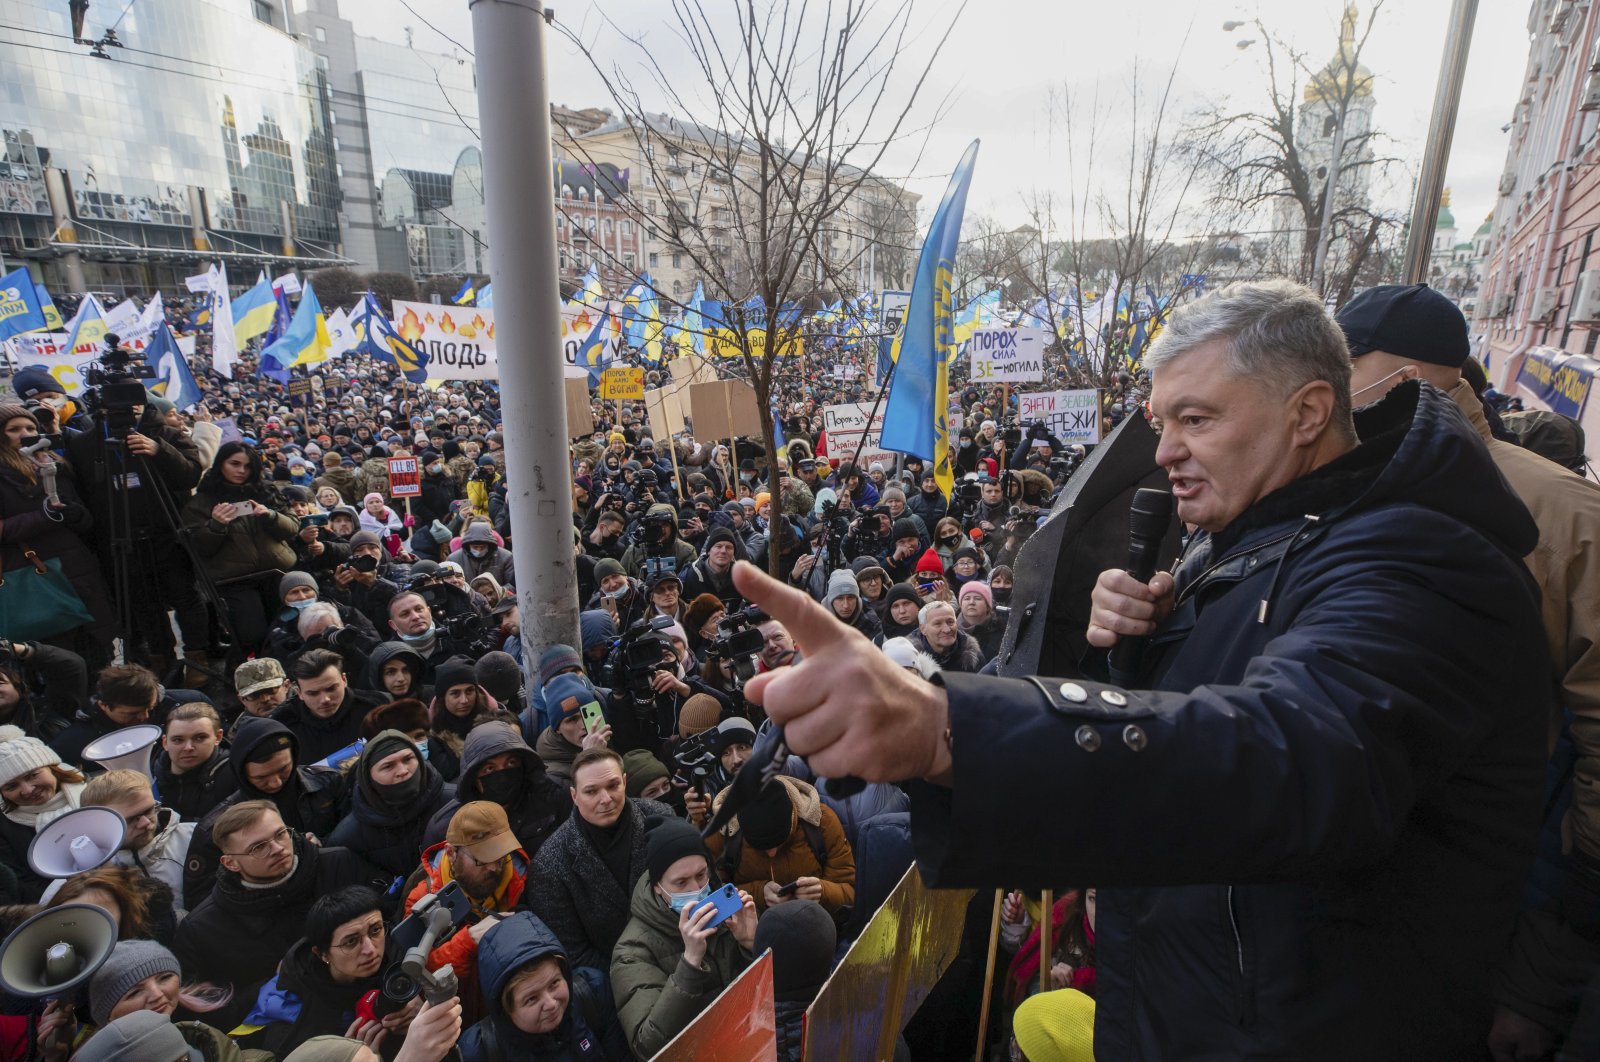 Former Ukrainian President Petro Poroshenko, (R), speaks to a crowd in front of a court building prior to a court session, in Kyiv, Ukraine, Jan. 19, 2022. (AP Photo)